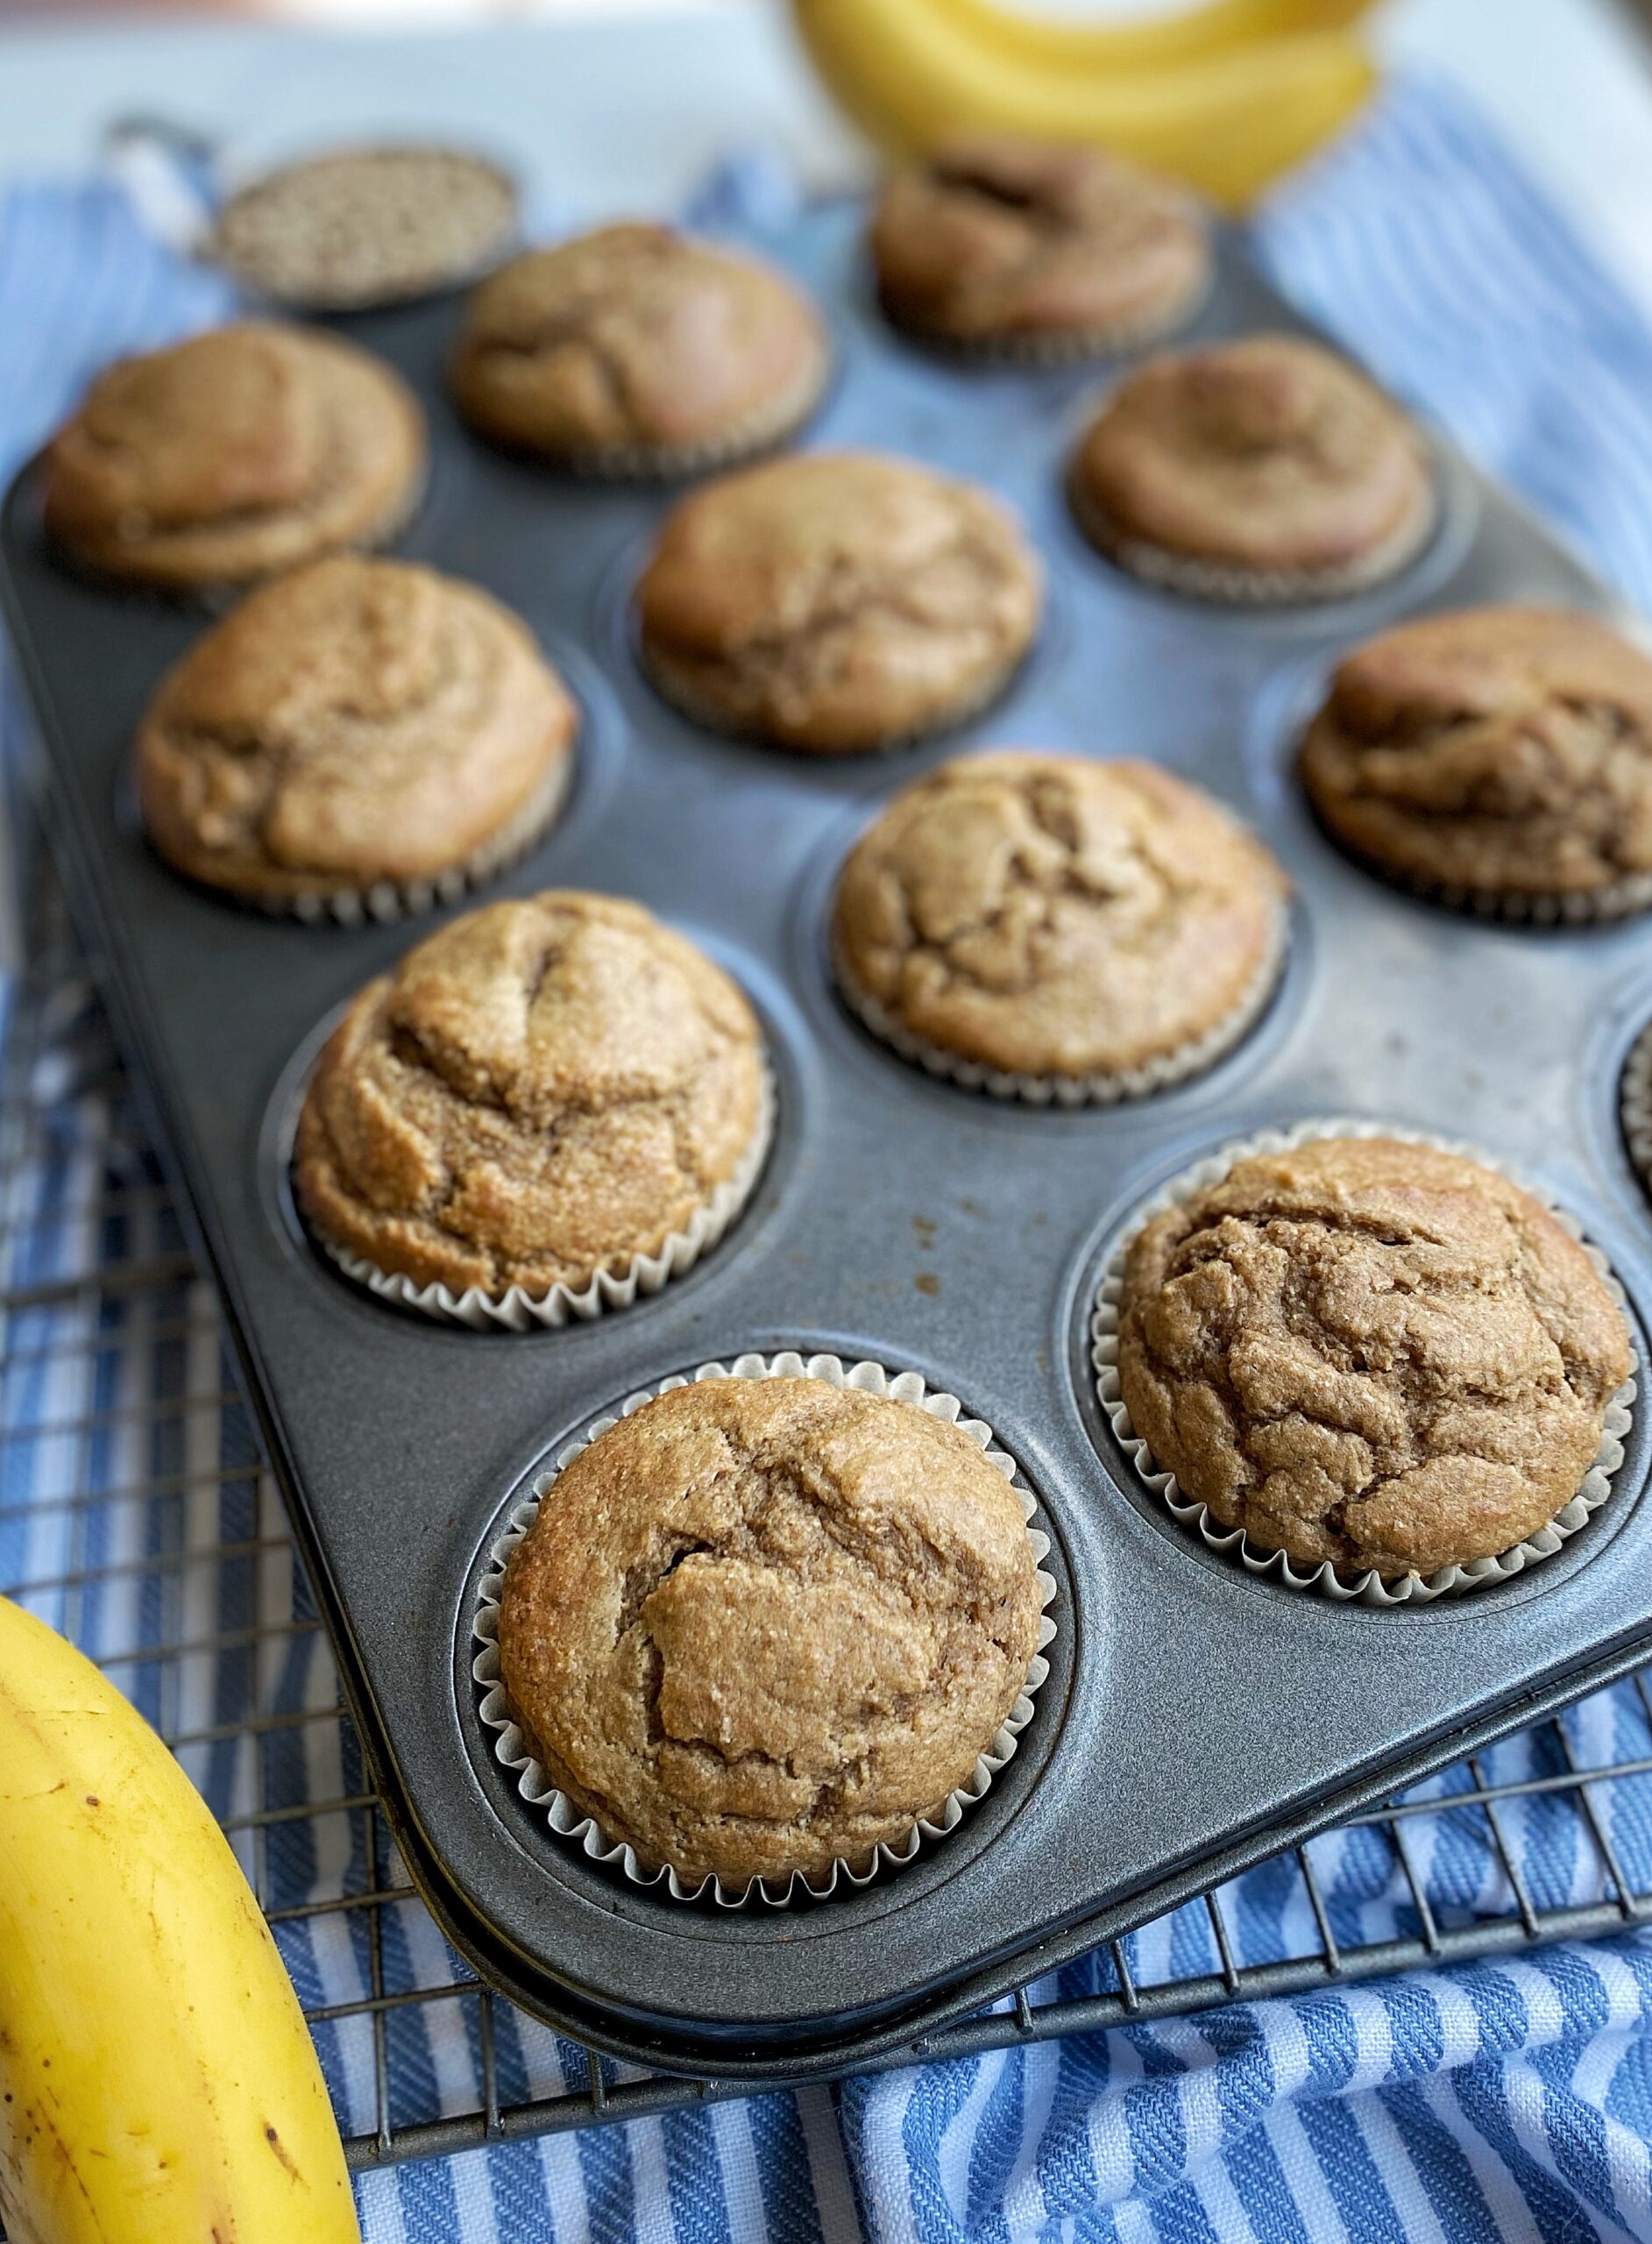 Baked muffins in a cupcake tin filled with paper muffin liners. Muffin tin is sitting on a cooling rack on top of a kitchen towel and is surrounded by bananas.